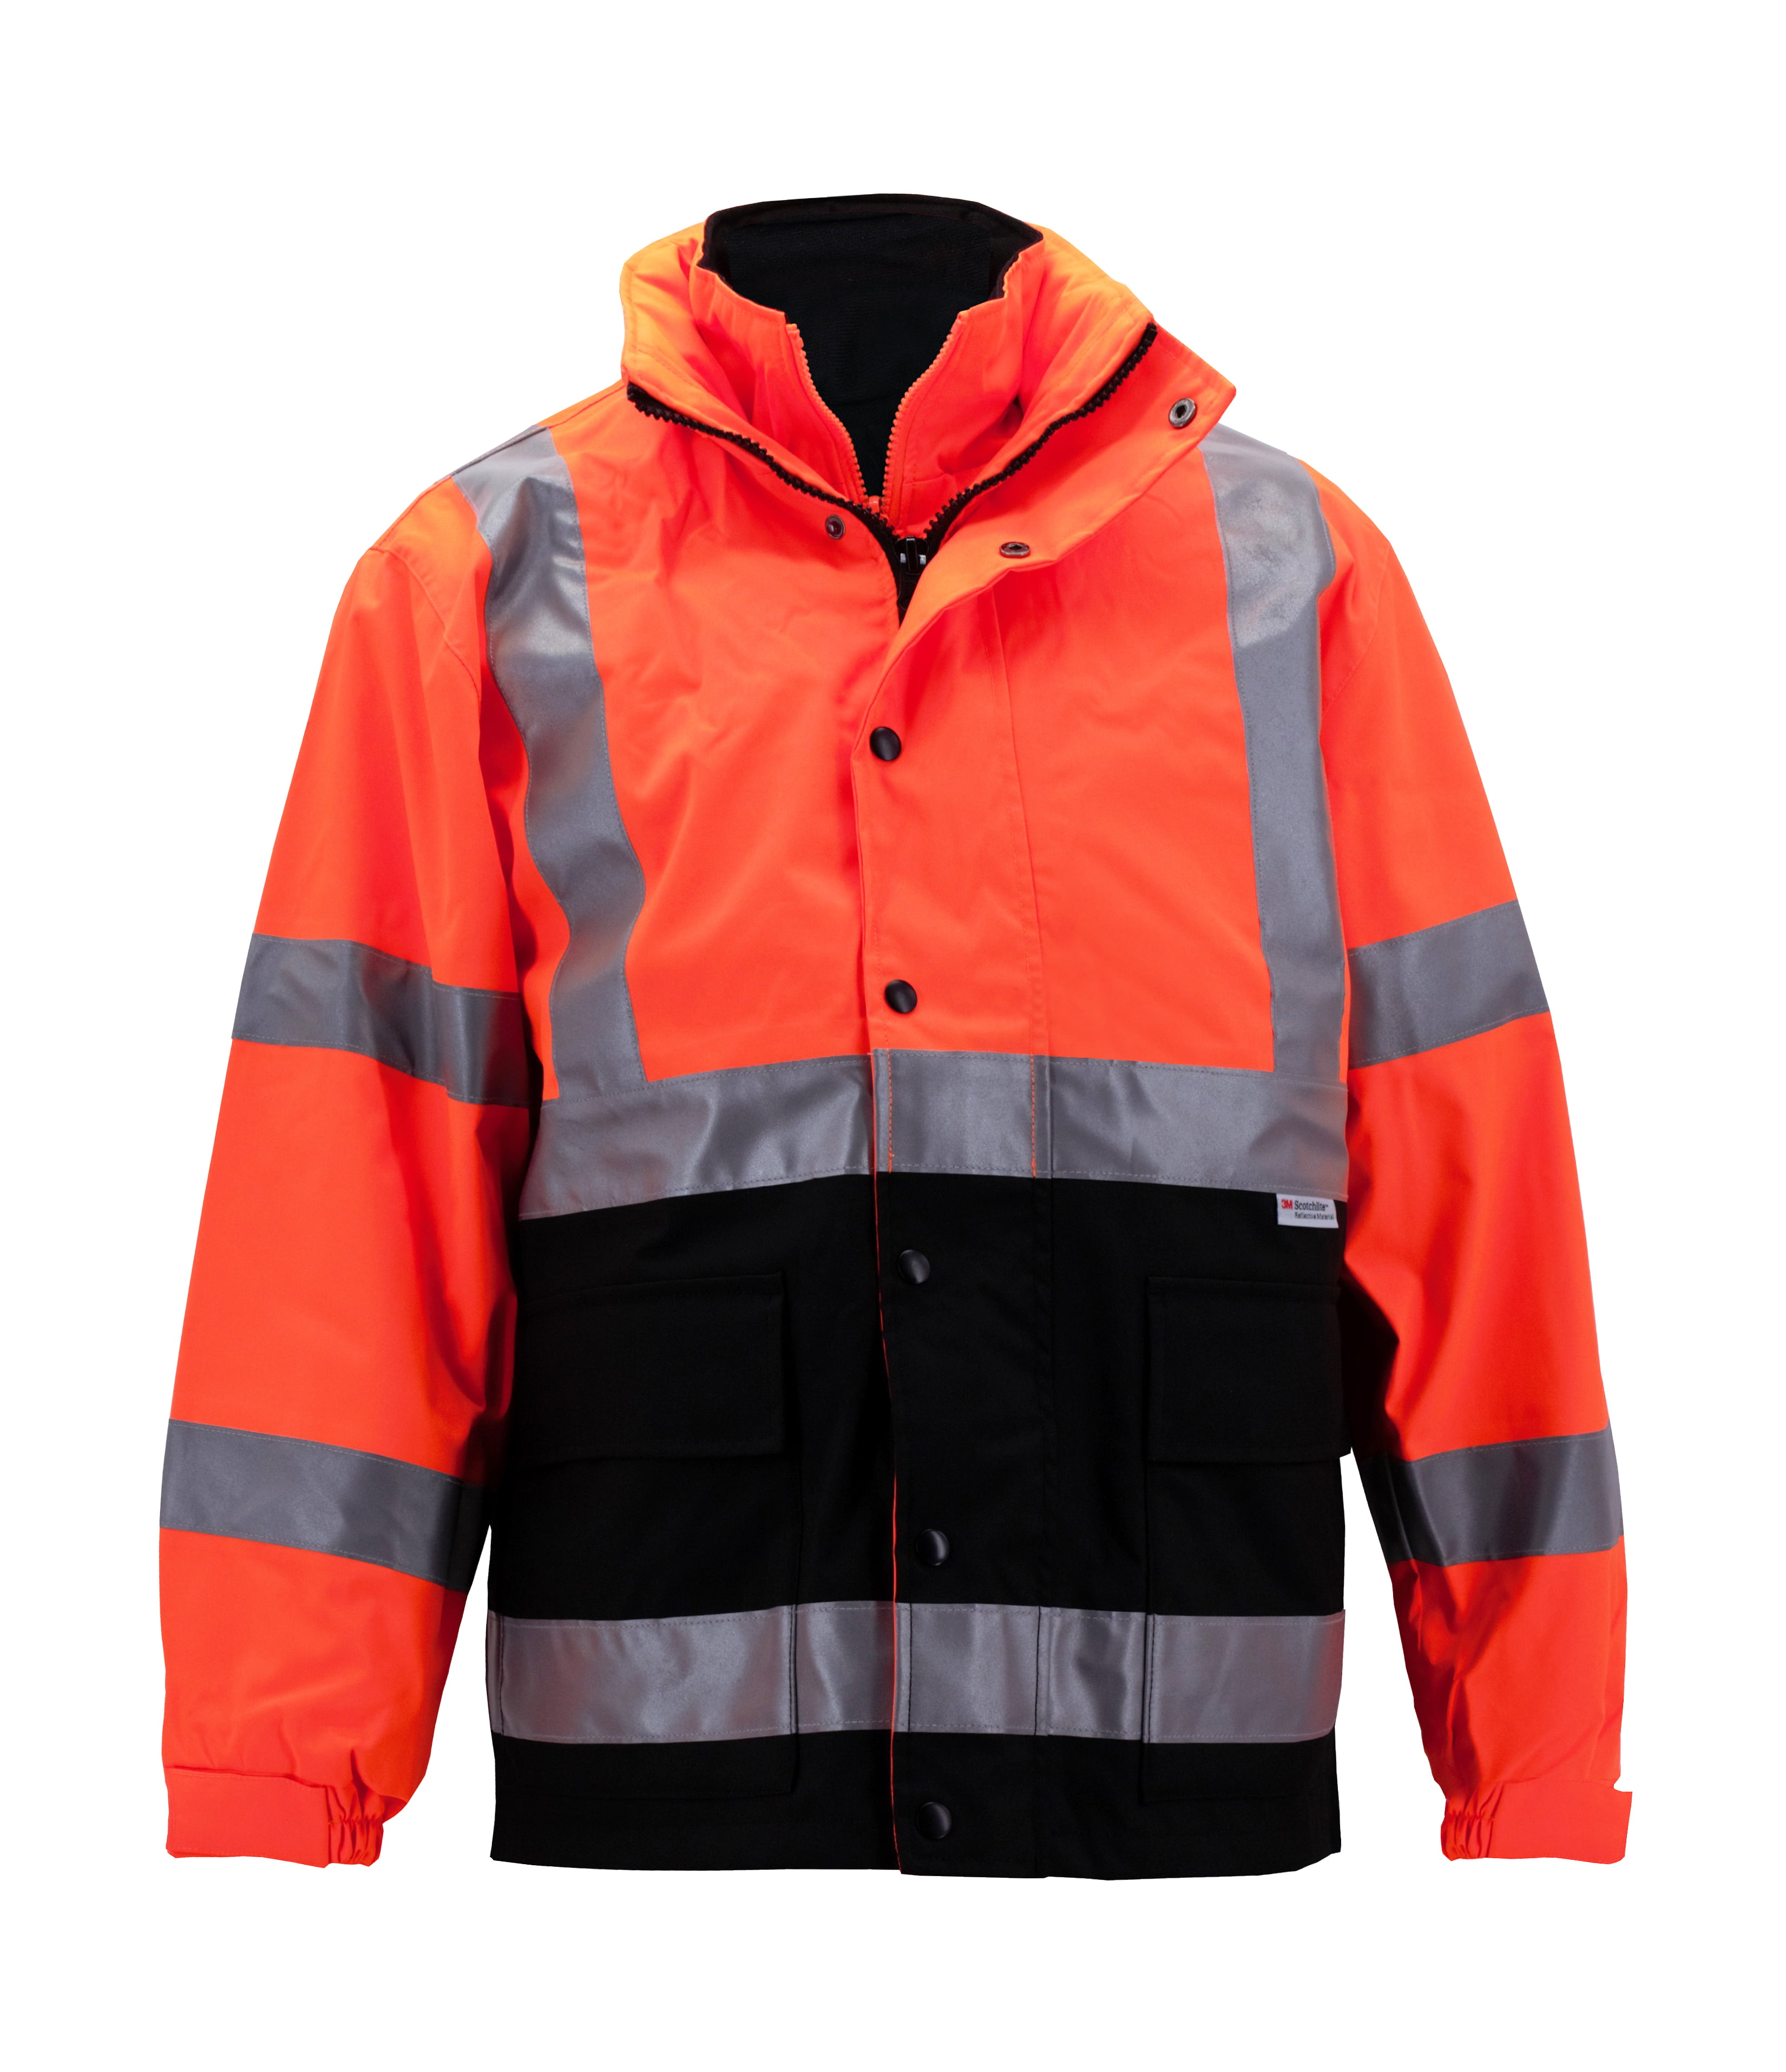 Men's Class 3 Safety High Visibility Water Resistant Reflective Neon Work  Jacket (3M Scotchlite Neon Orange, S)